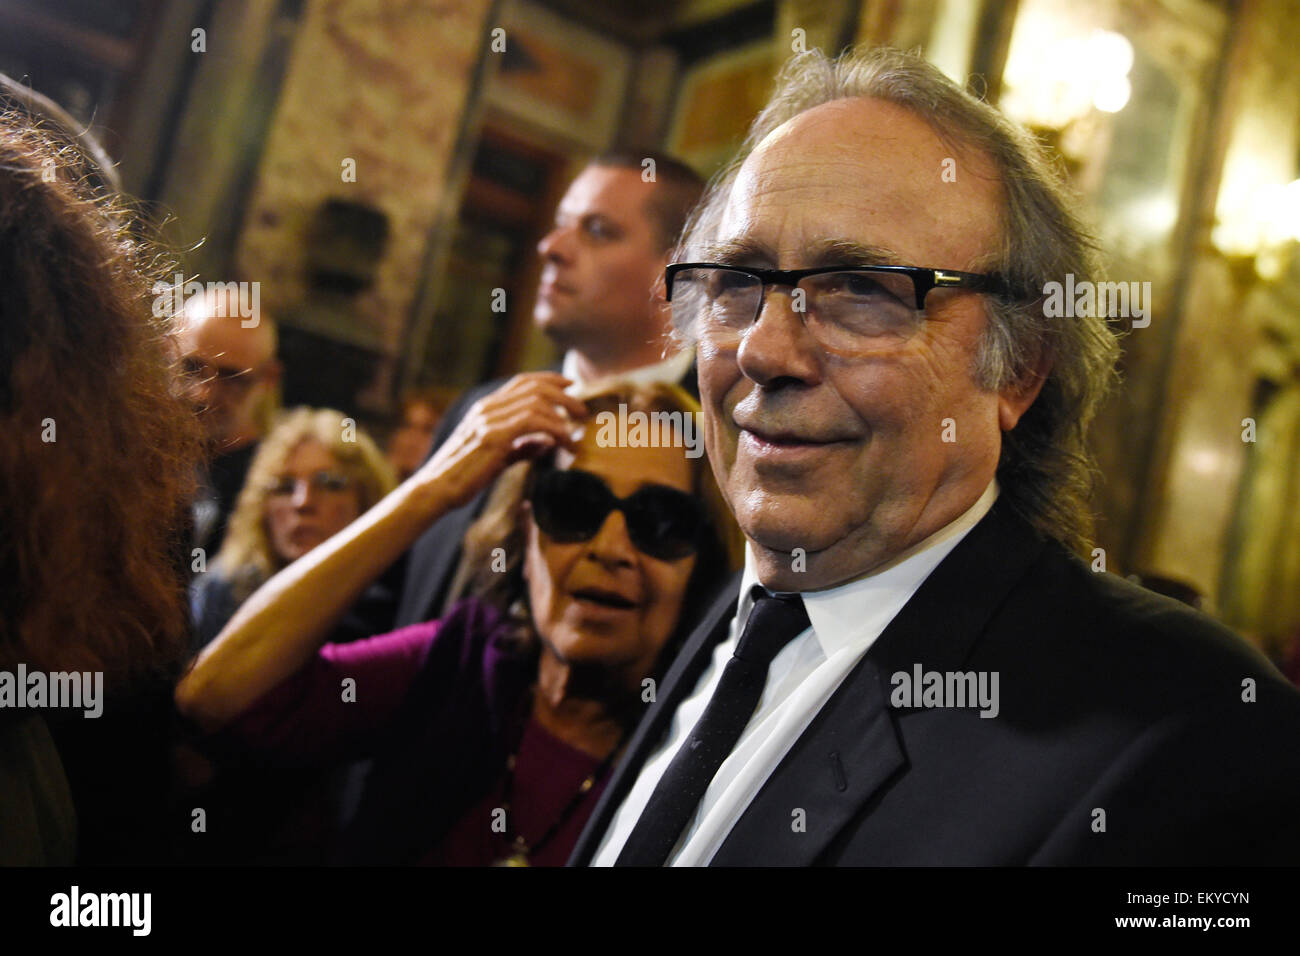 Montevideo, Uruguay. 14th Apr, 2015. The widow of Uruguayan writer Eduardo Galeano, Helena Villagra (L) and the Spanish singer Joan Manuel Serrat, react during the tribute to Eduardo Galeano organized by the government of Uruguay, in the Hall of Lost Steps of the Legislative Palace, in Montevideo, capital of Uruguay, on April 14, 2015. According to local press, Eduardo Galeano, author of 'The Open Veins of Latin America' (1971), died on Monday in Montevideo at the age of 74 years as a result of lung cancer. Galeano's body will be cremated on Wednesday. Credit:  Nicolas Celaya/Xinhua/Alamy Live Stock Photo